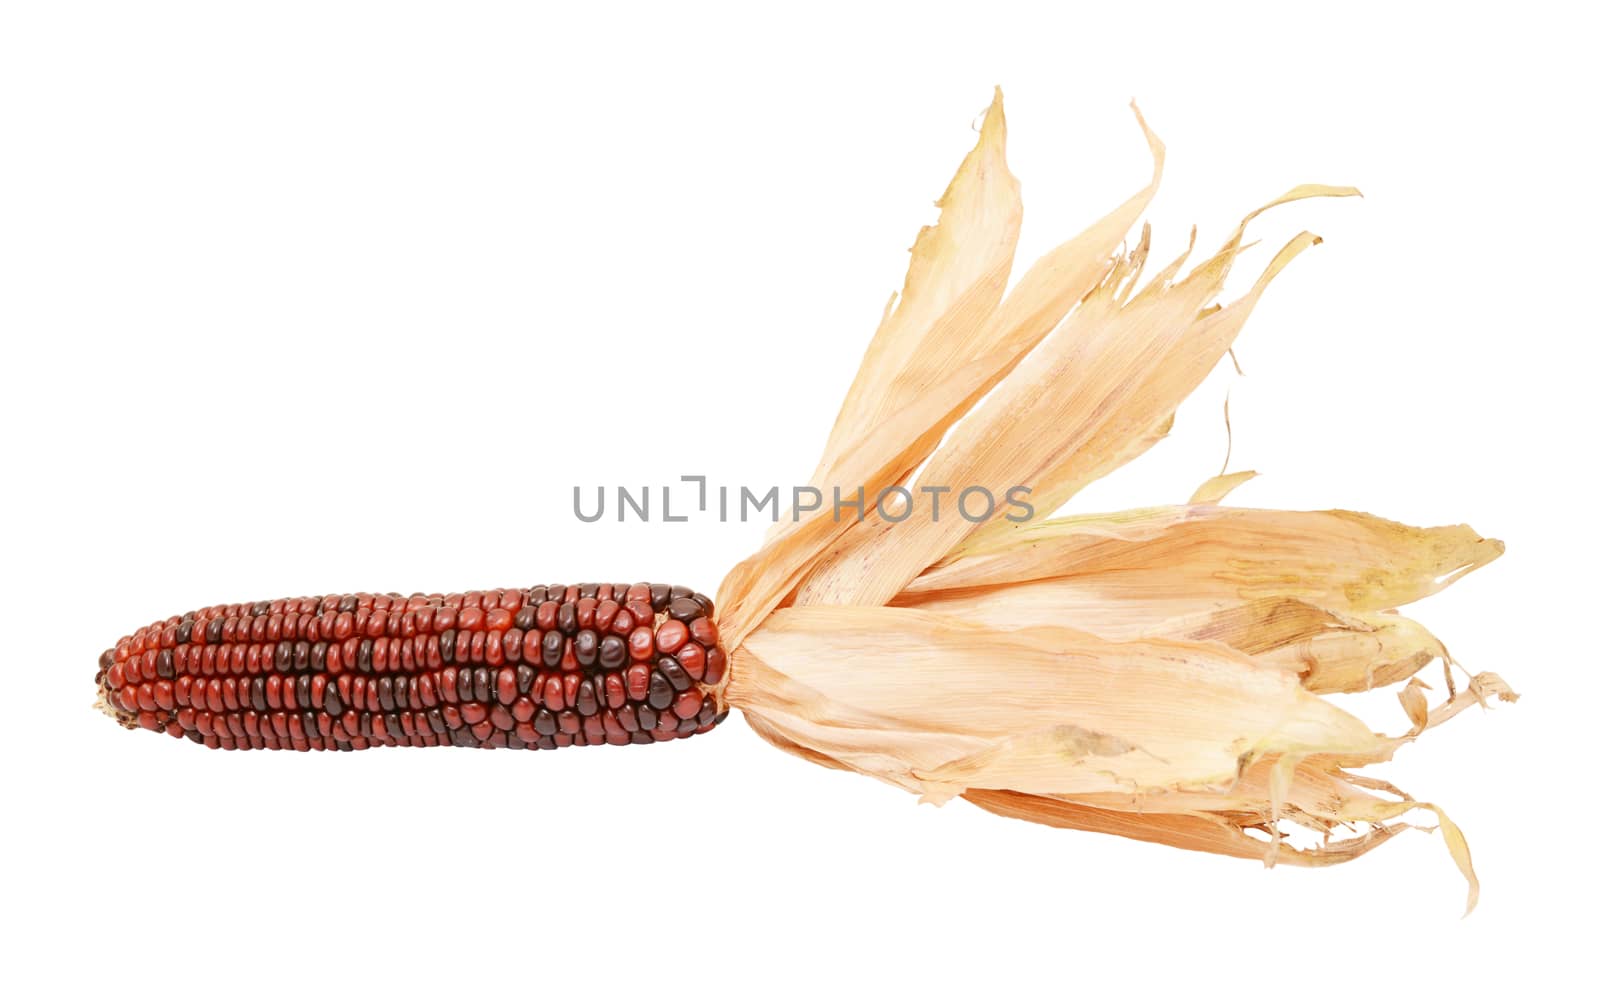 Deep red and brown Indian corn with papery dried husks by sarahdoow